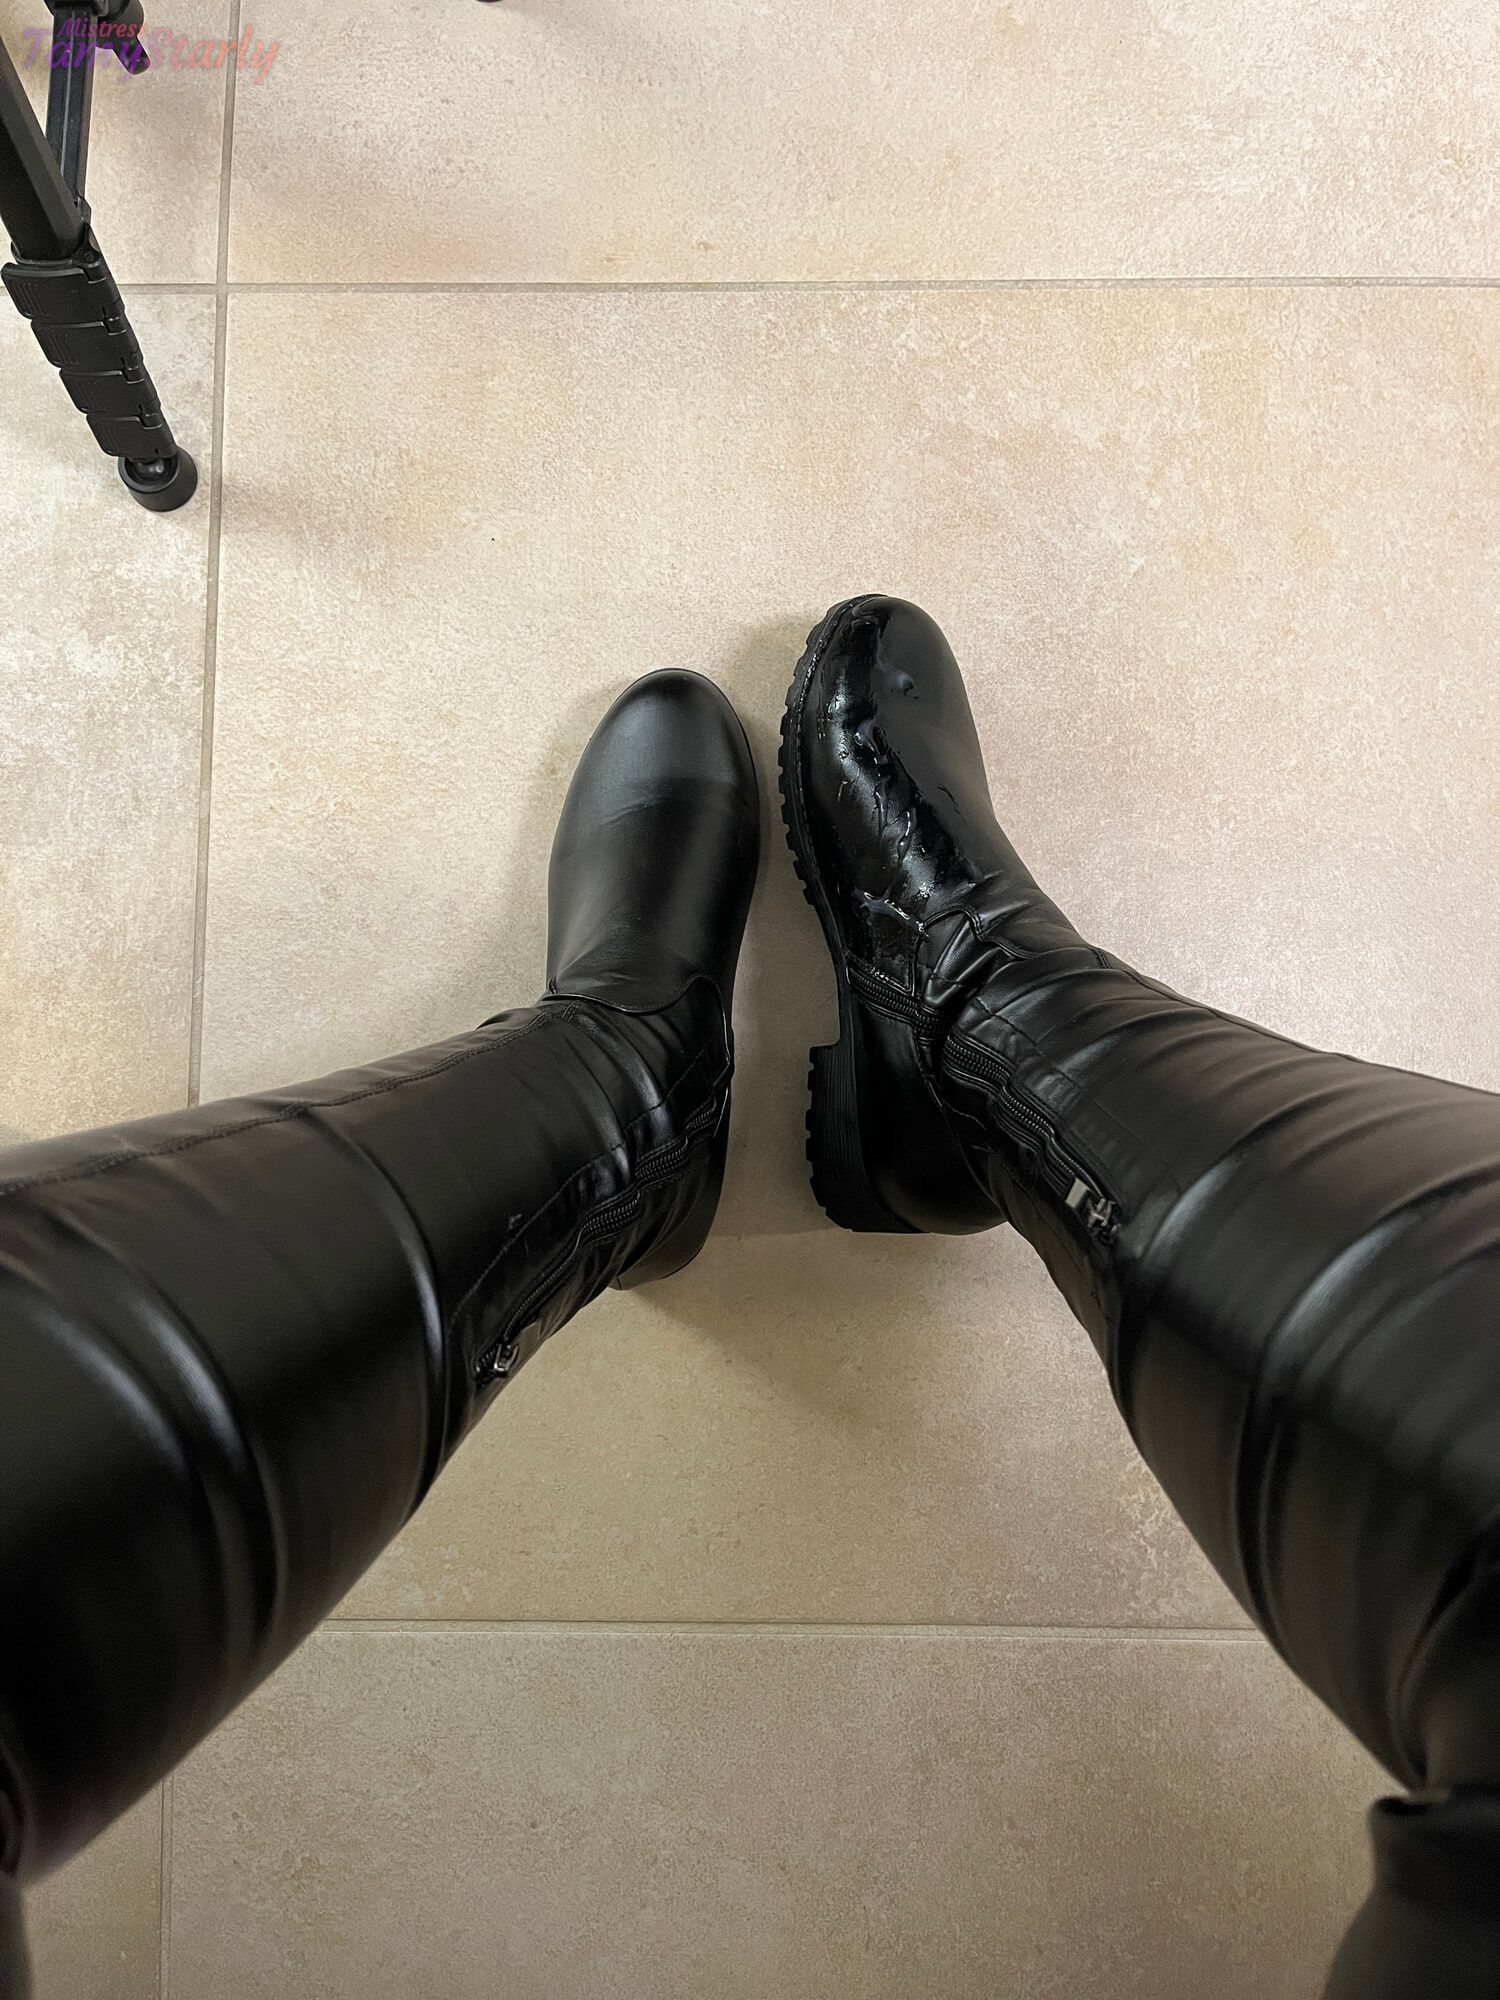 March & Blast in Super Thigh Boots - Ball Stomp, Bootjob #2